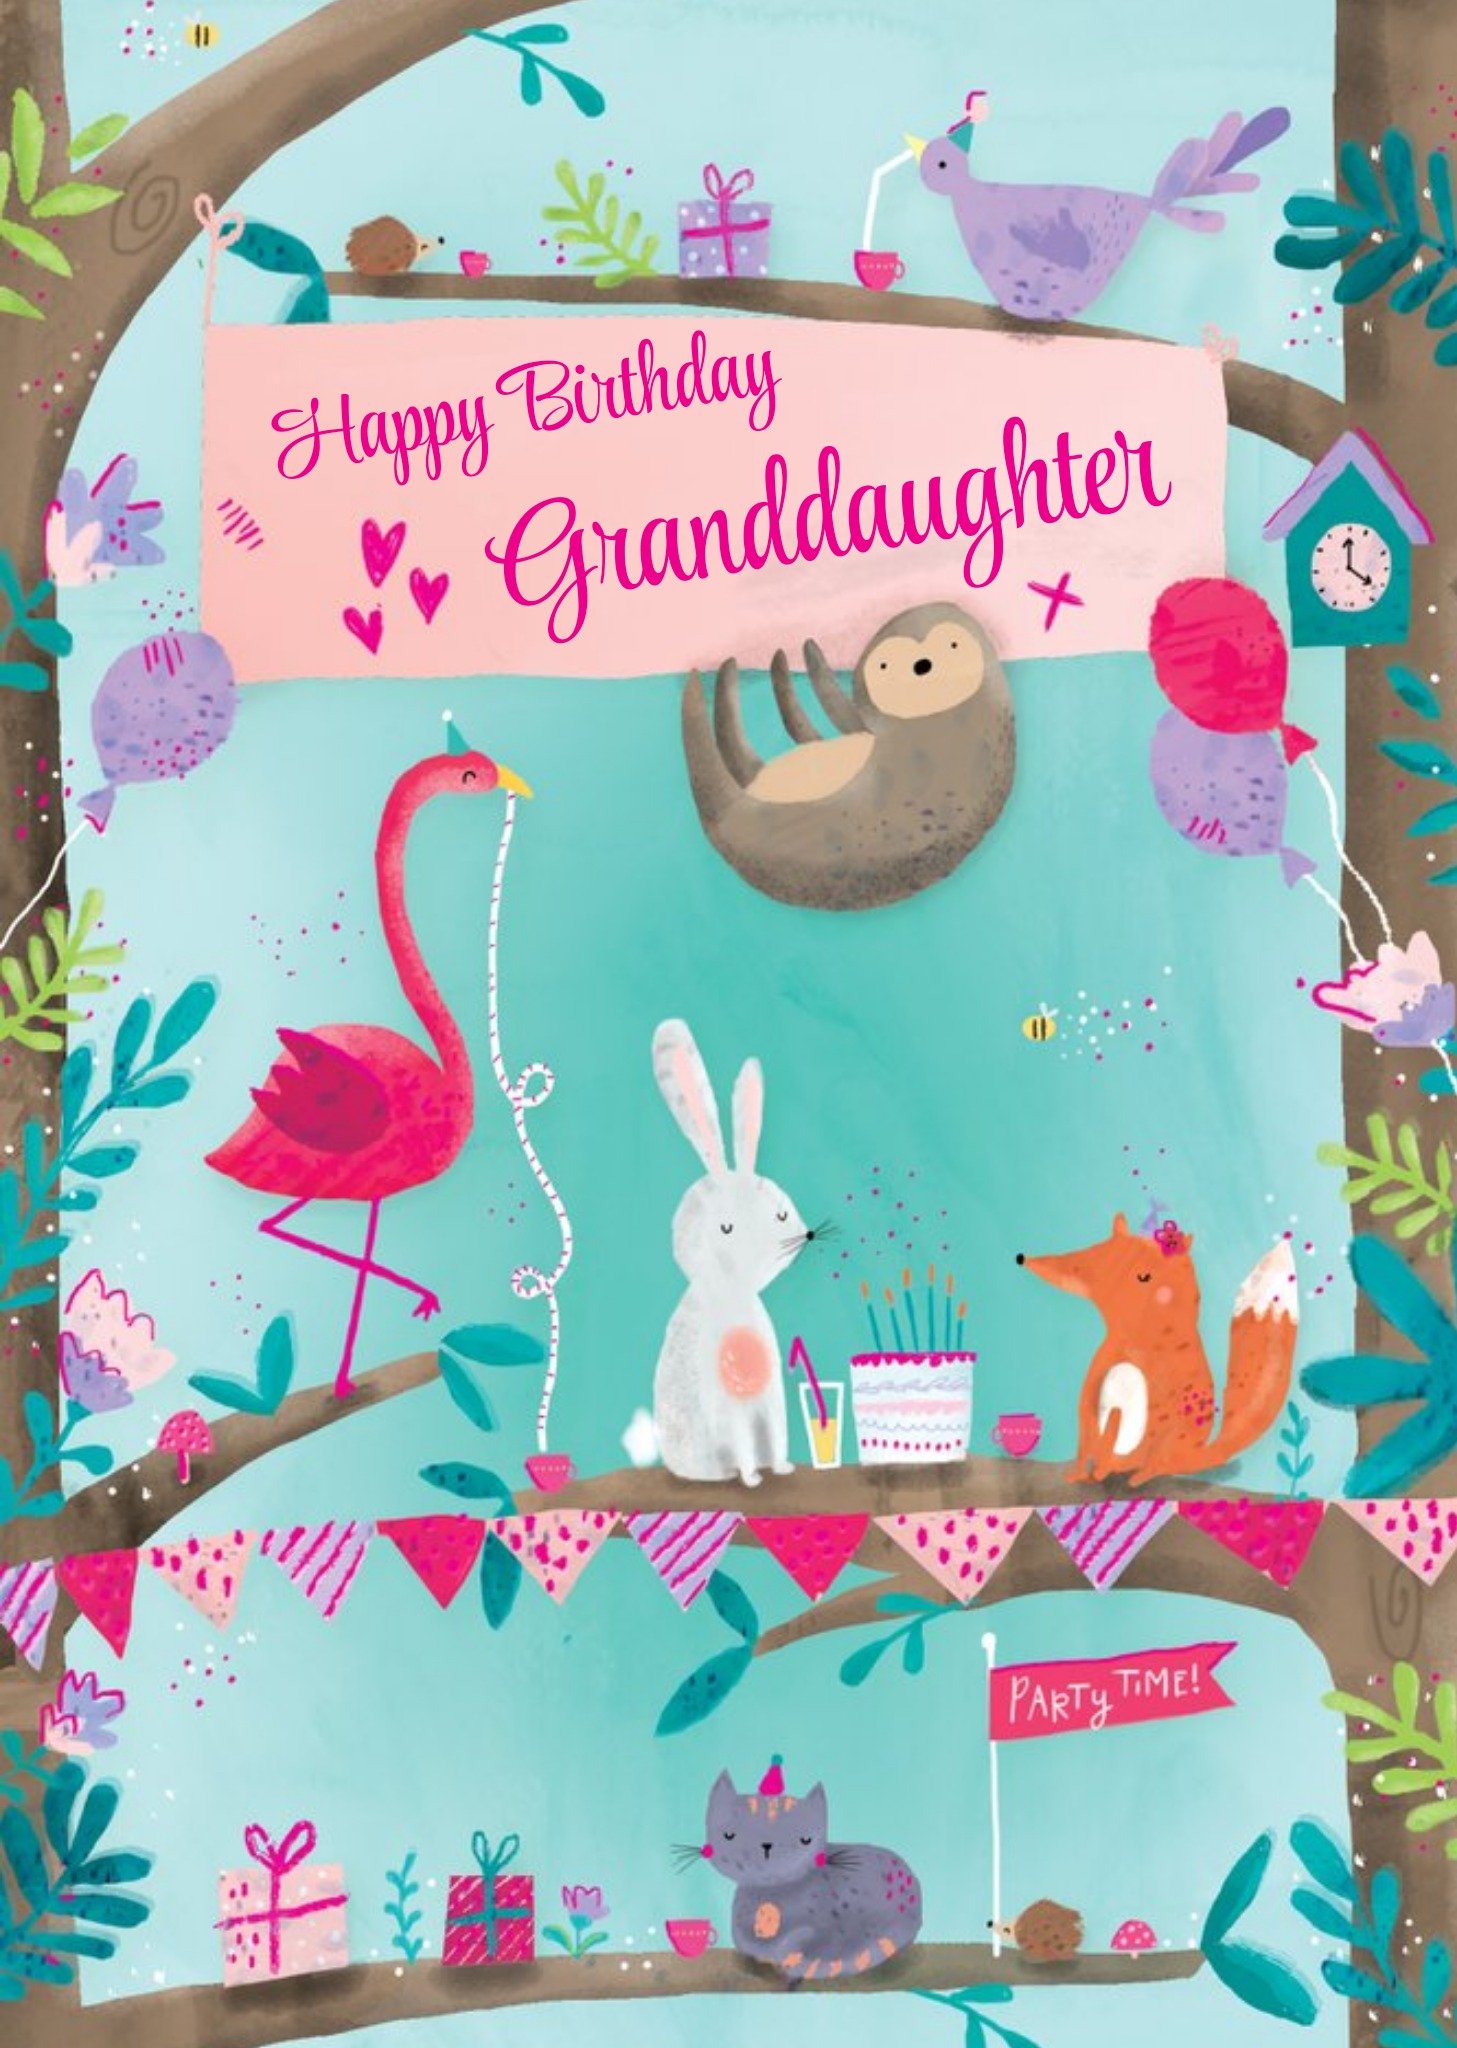 Moonpig Cute Illustrated Animal Tea Party Granddaughter Birthday Card From Paperlink Ecard